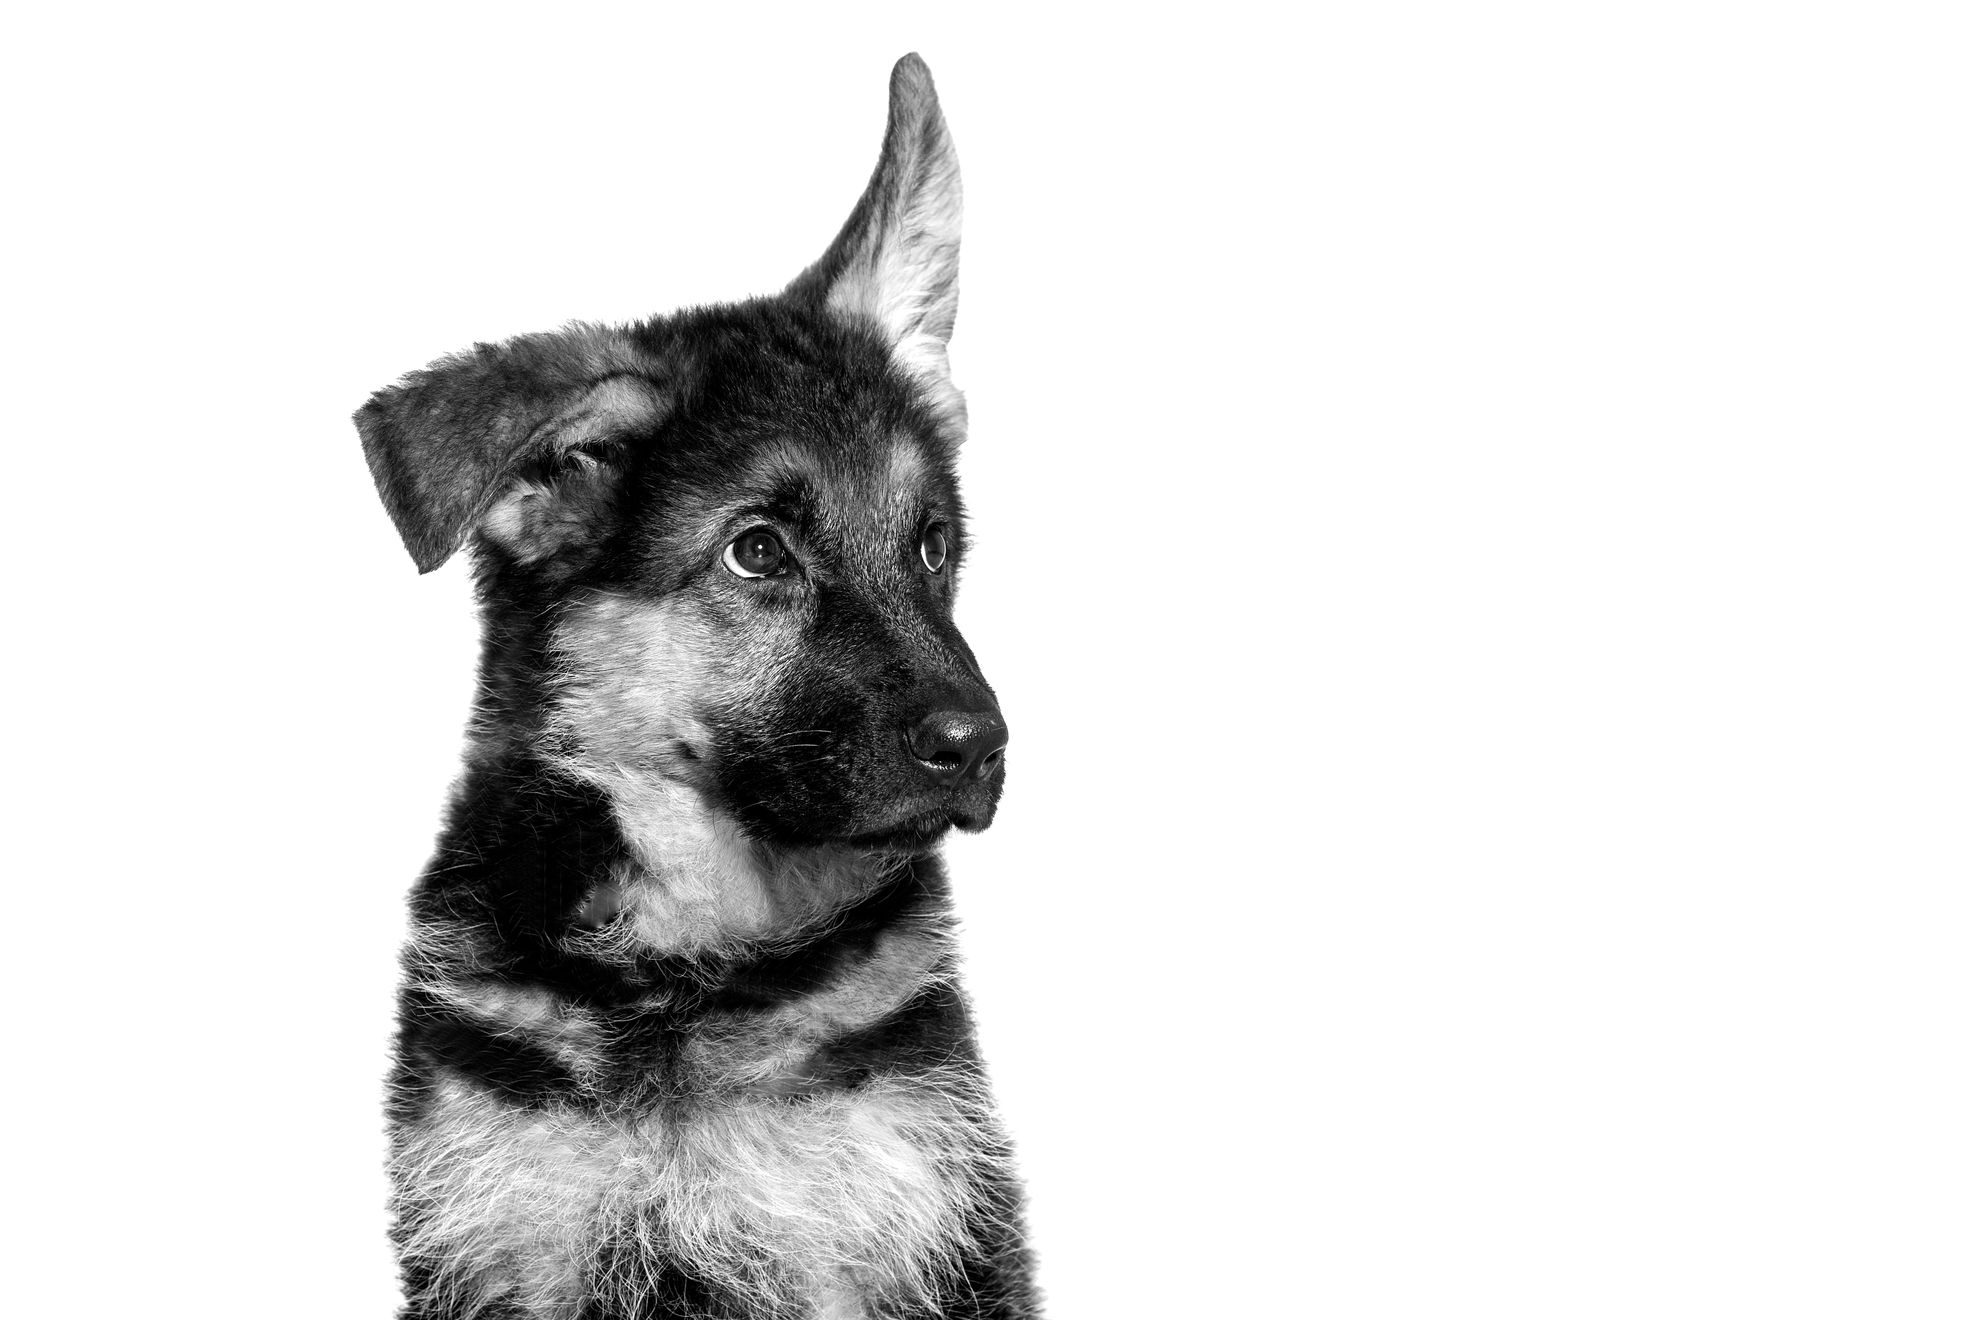 German shepherd puppy sitting in black and white on a white background